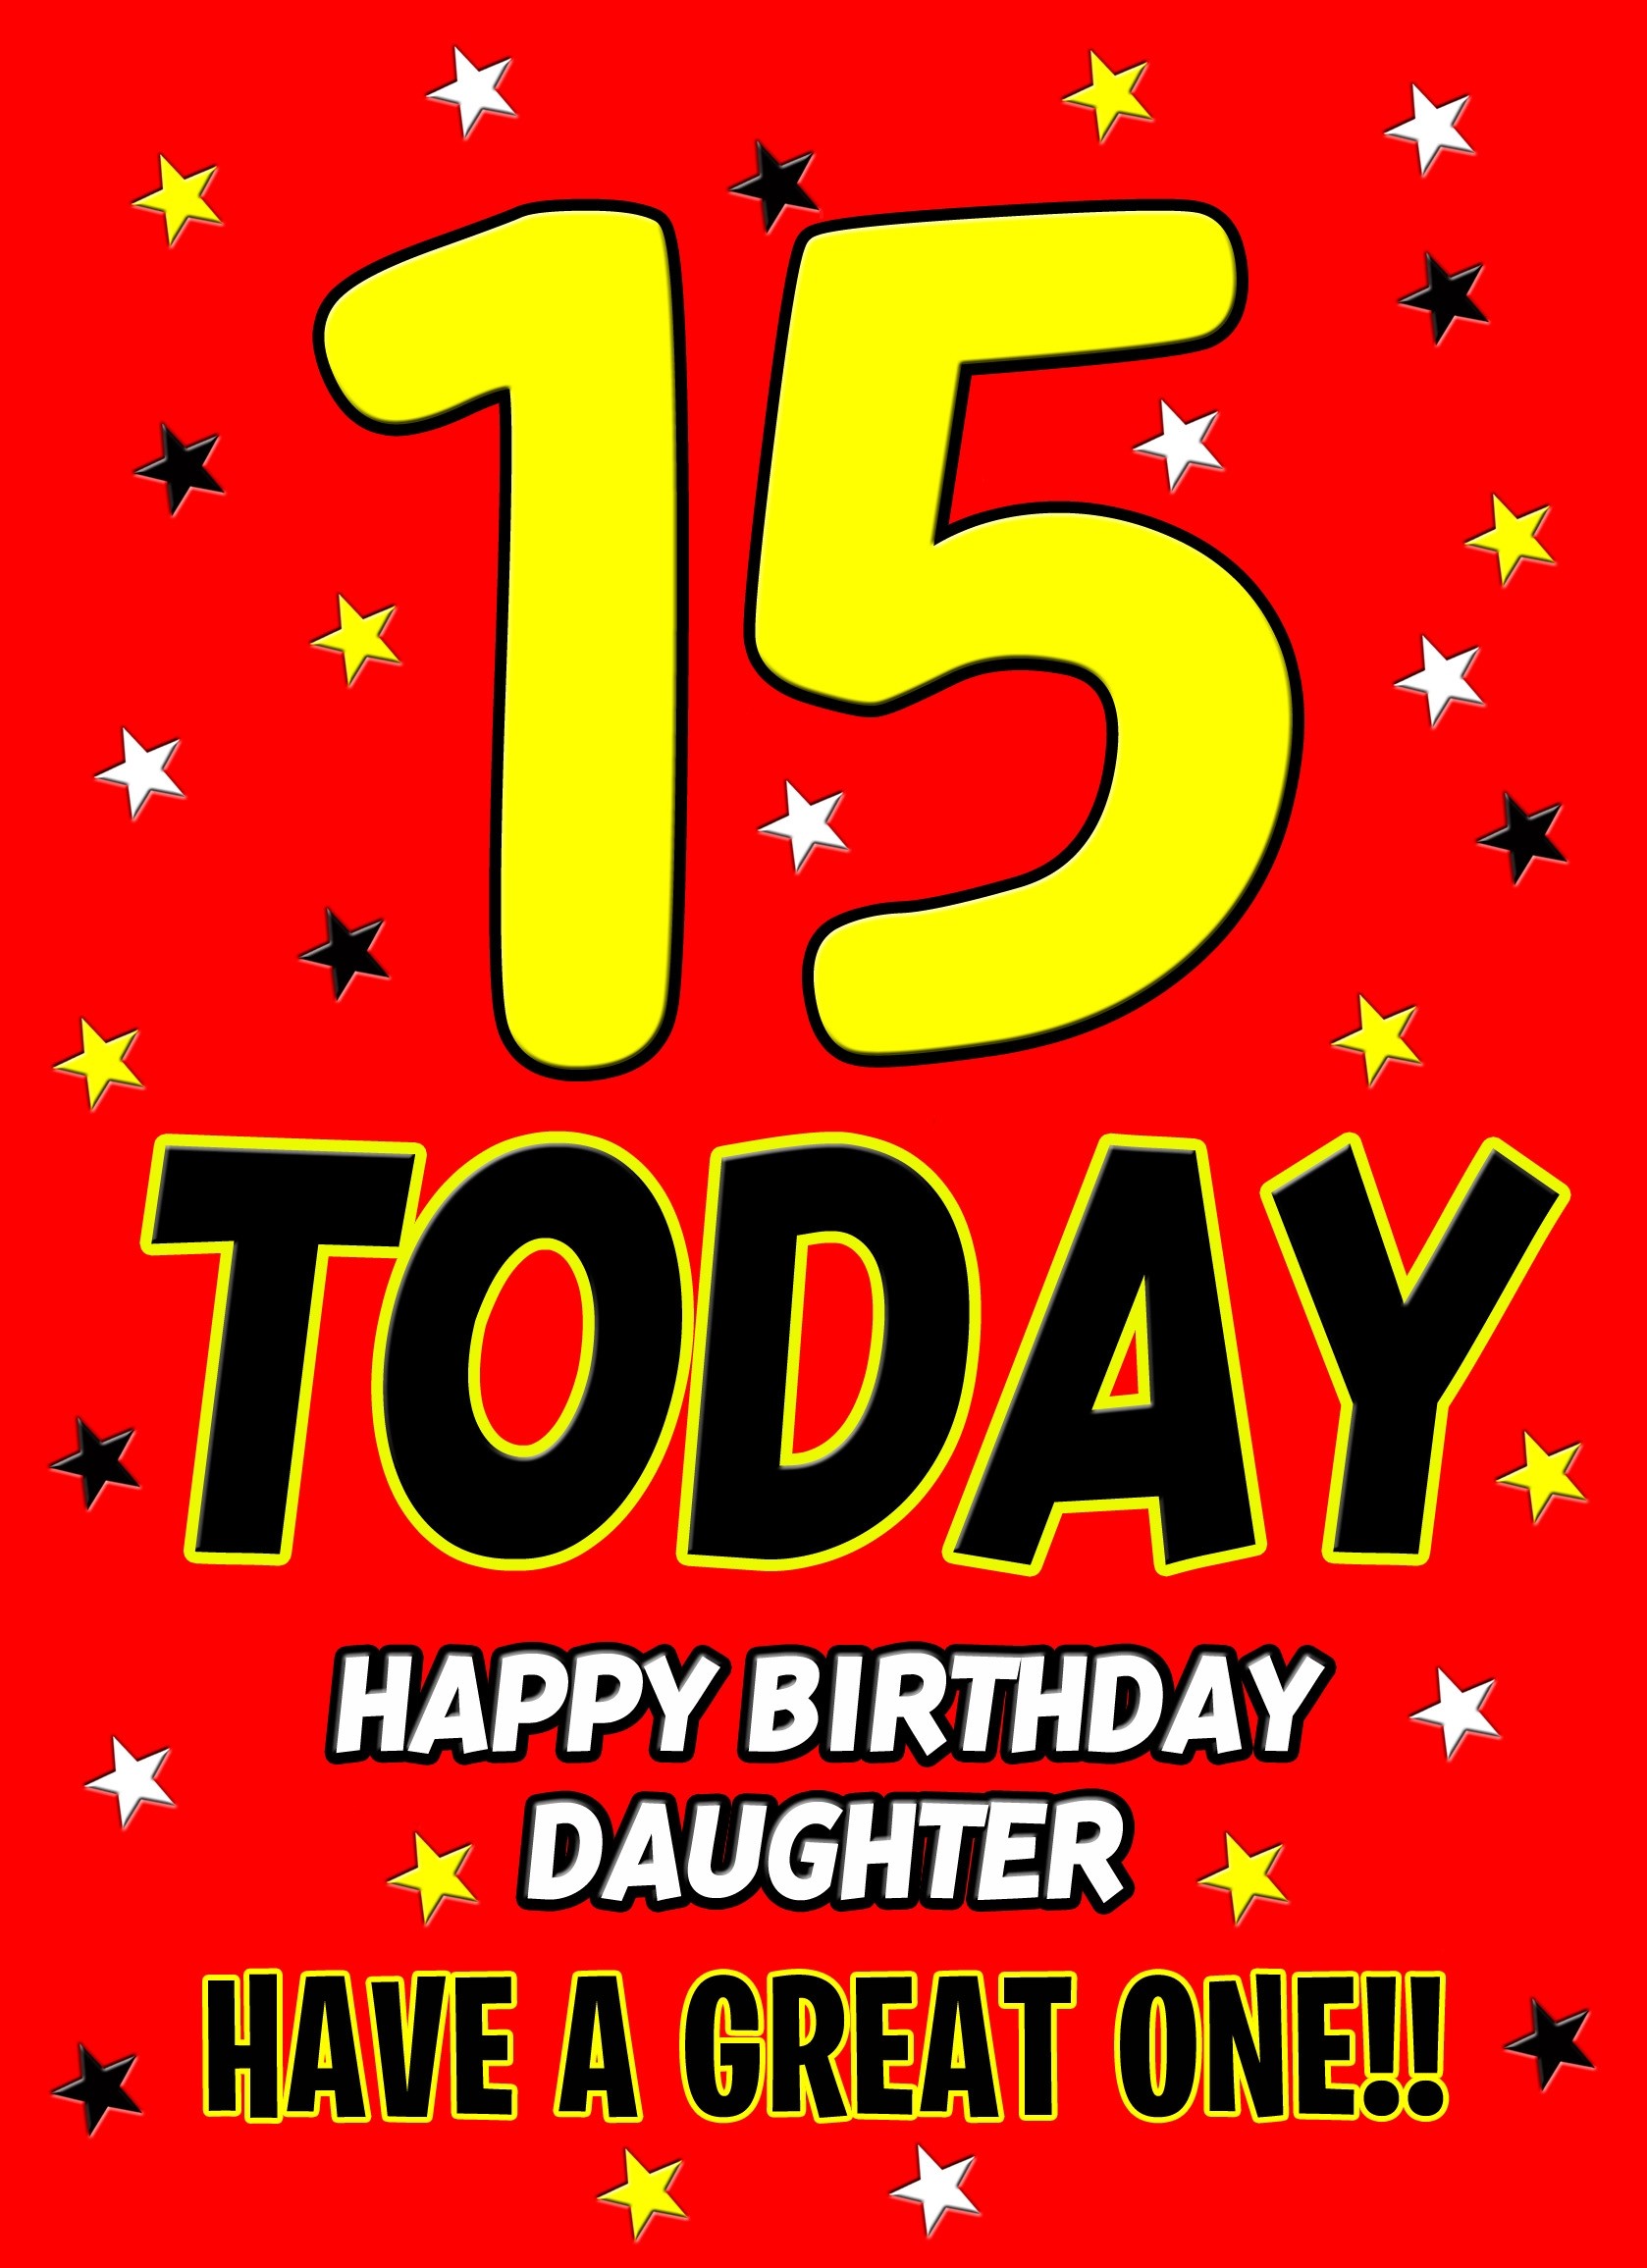 15 Today Birthday Card (Daughter)